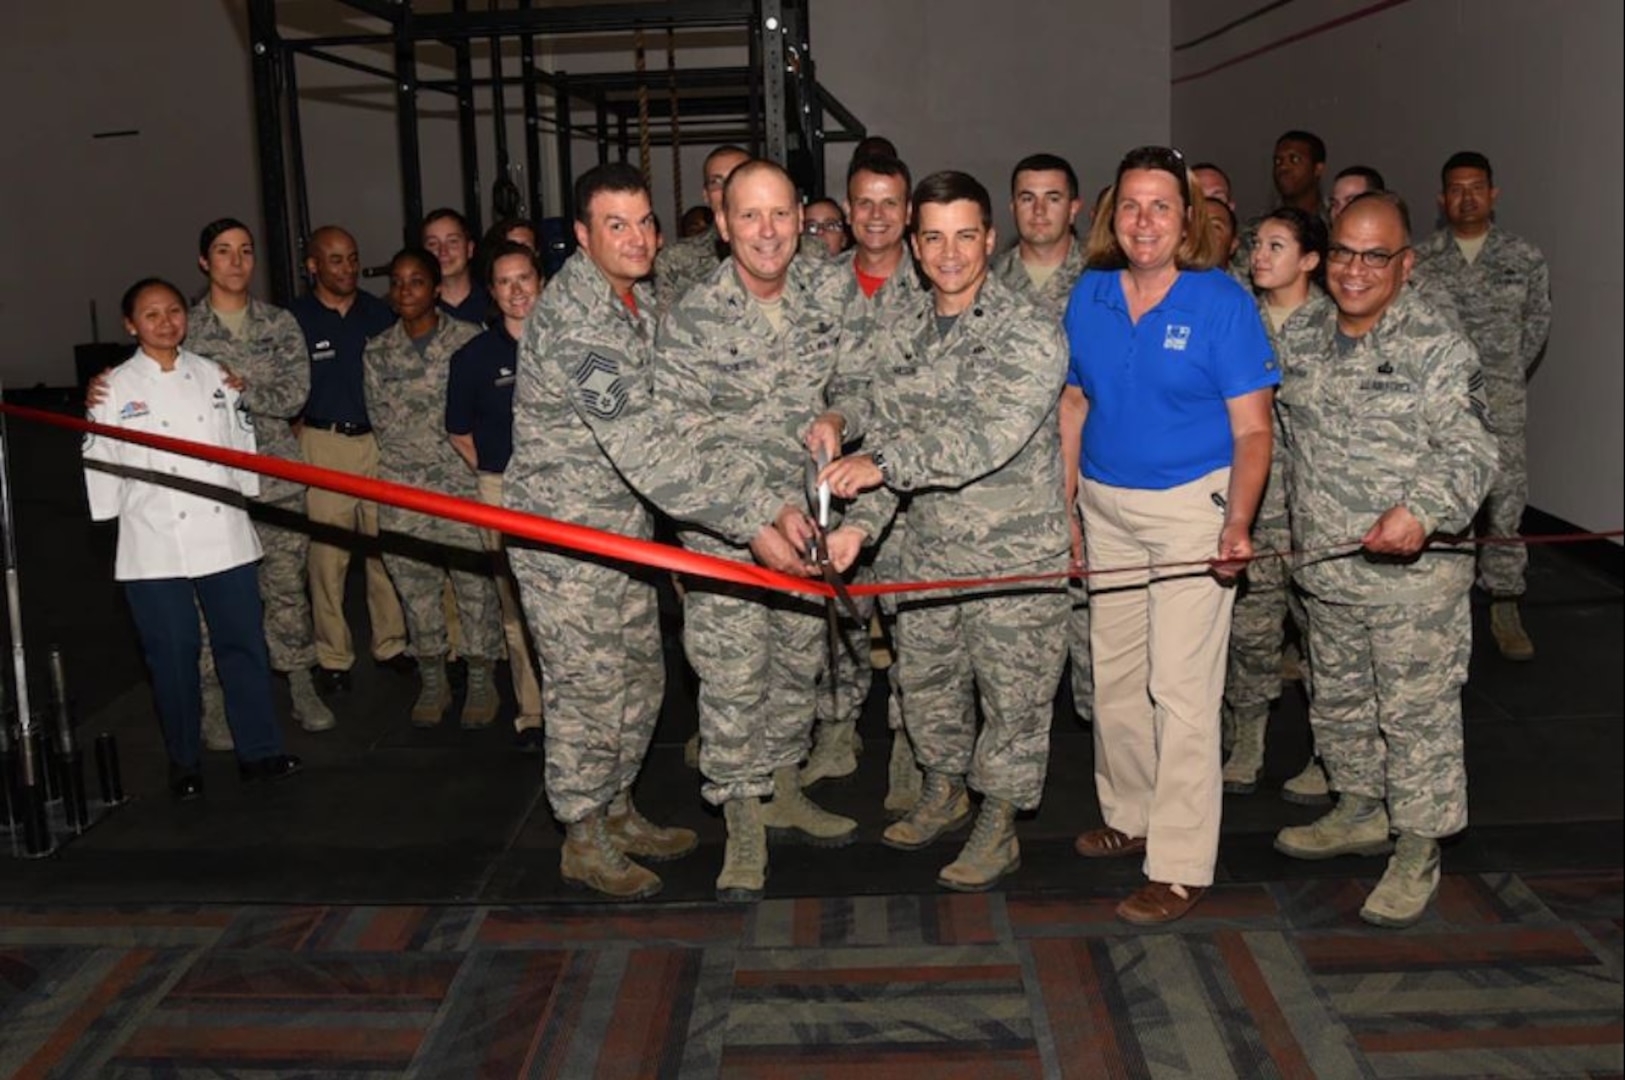 PETERSON AIR FORCE BASE, Colo. - Col. Doug Schiess, 21st Space Wing commander, along with Airmen from the 21st Civil Engineer Squadron and 21st Force Support Squadron, cuts the ribbon for the grand opening of 24-hour fitness at the Fitness Center, Peterson Air Force Base, Colo., June 16, 2017. Military ID registration for 24/7 access is now available at the Fitness Center. (U. S. Air Force photo by Robb Lingley)